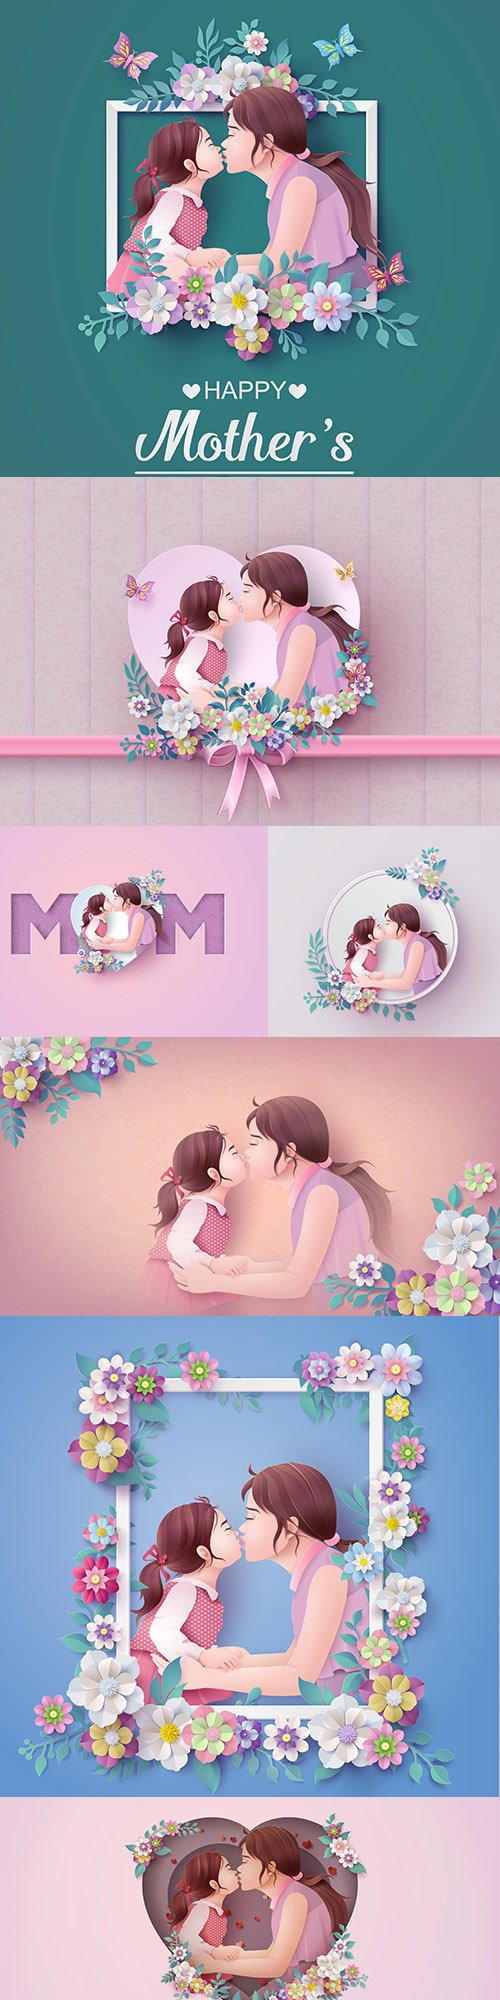 Mother's day happy mother with child illustration